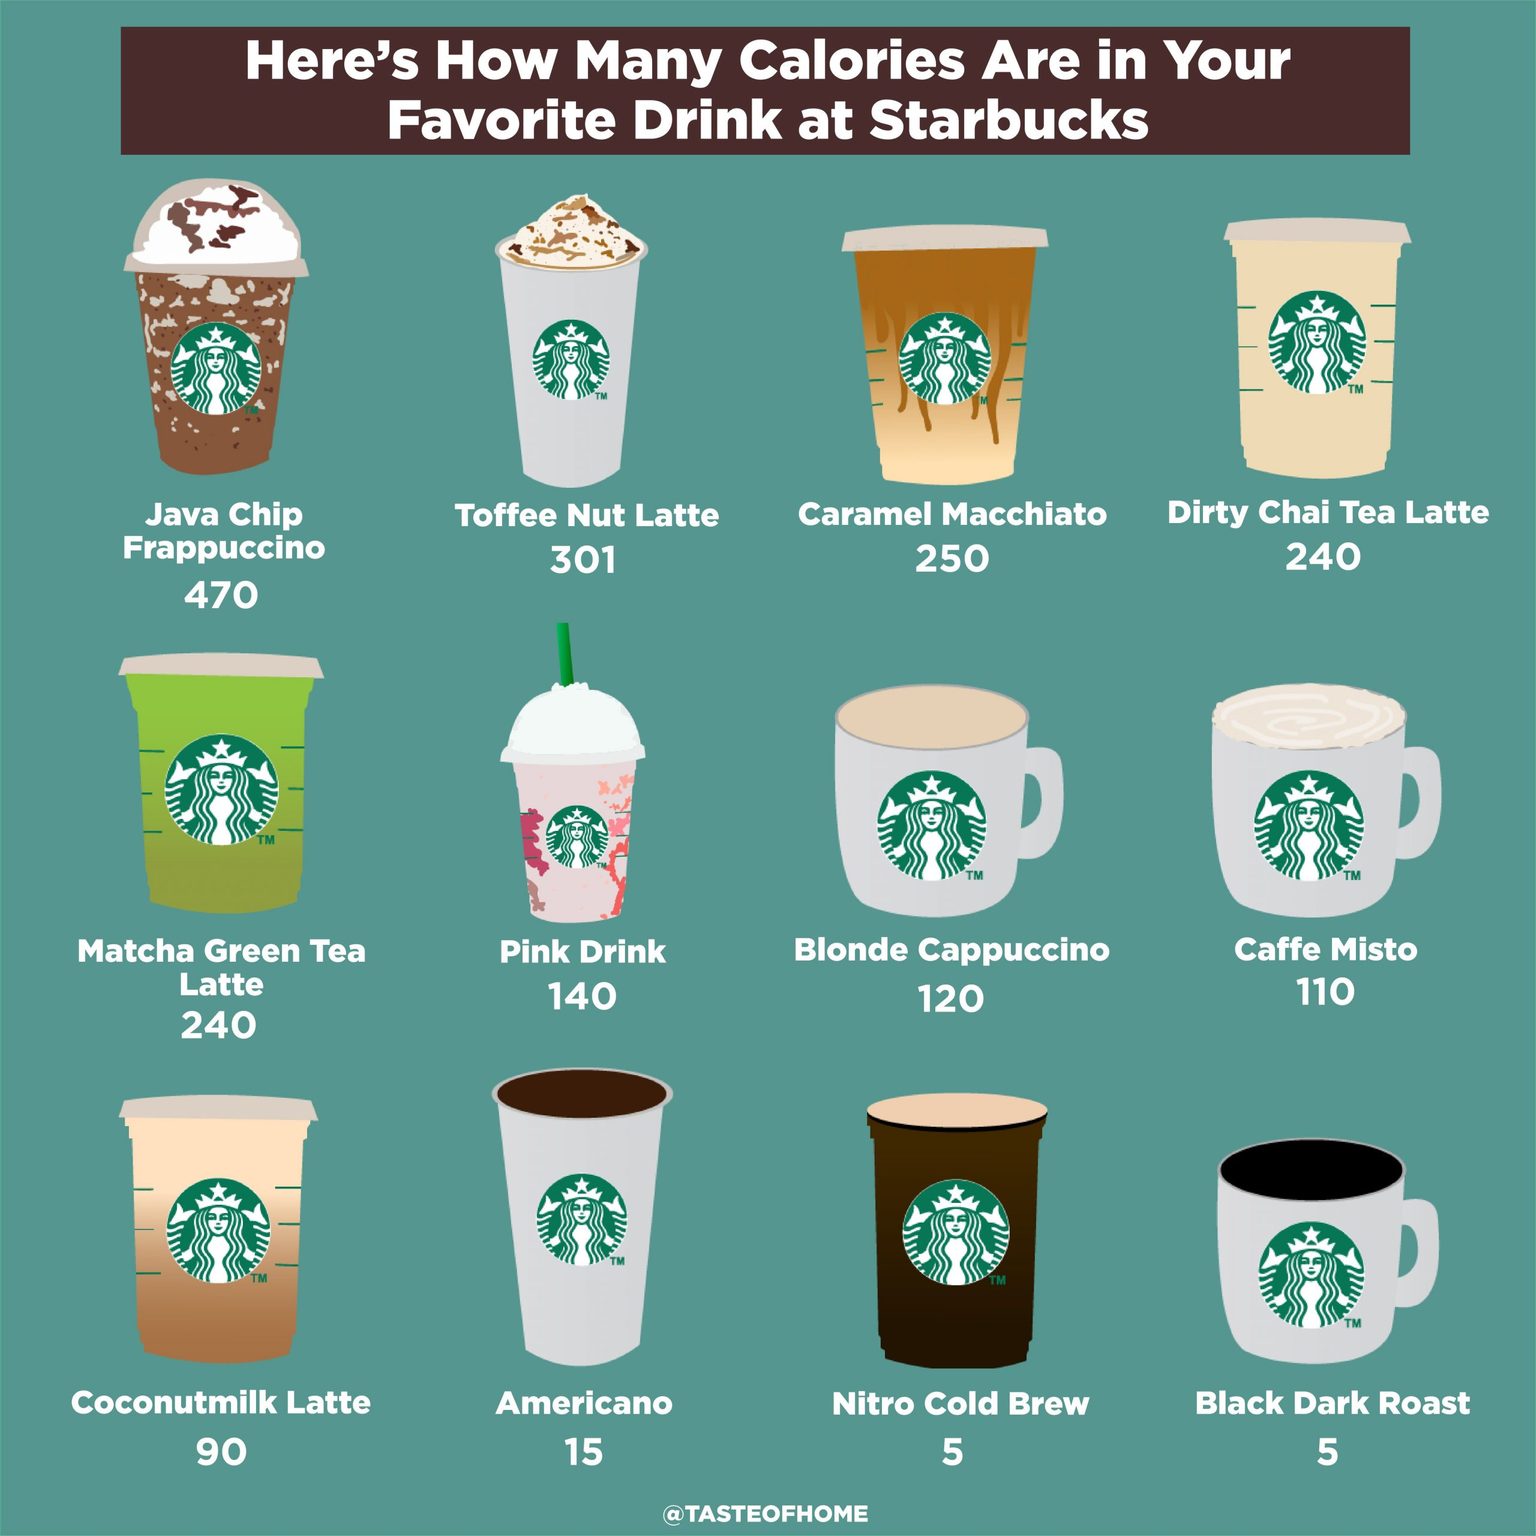 Starbucks Drinks: How Many Calories Are in Your Favourite?